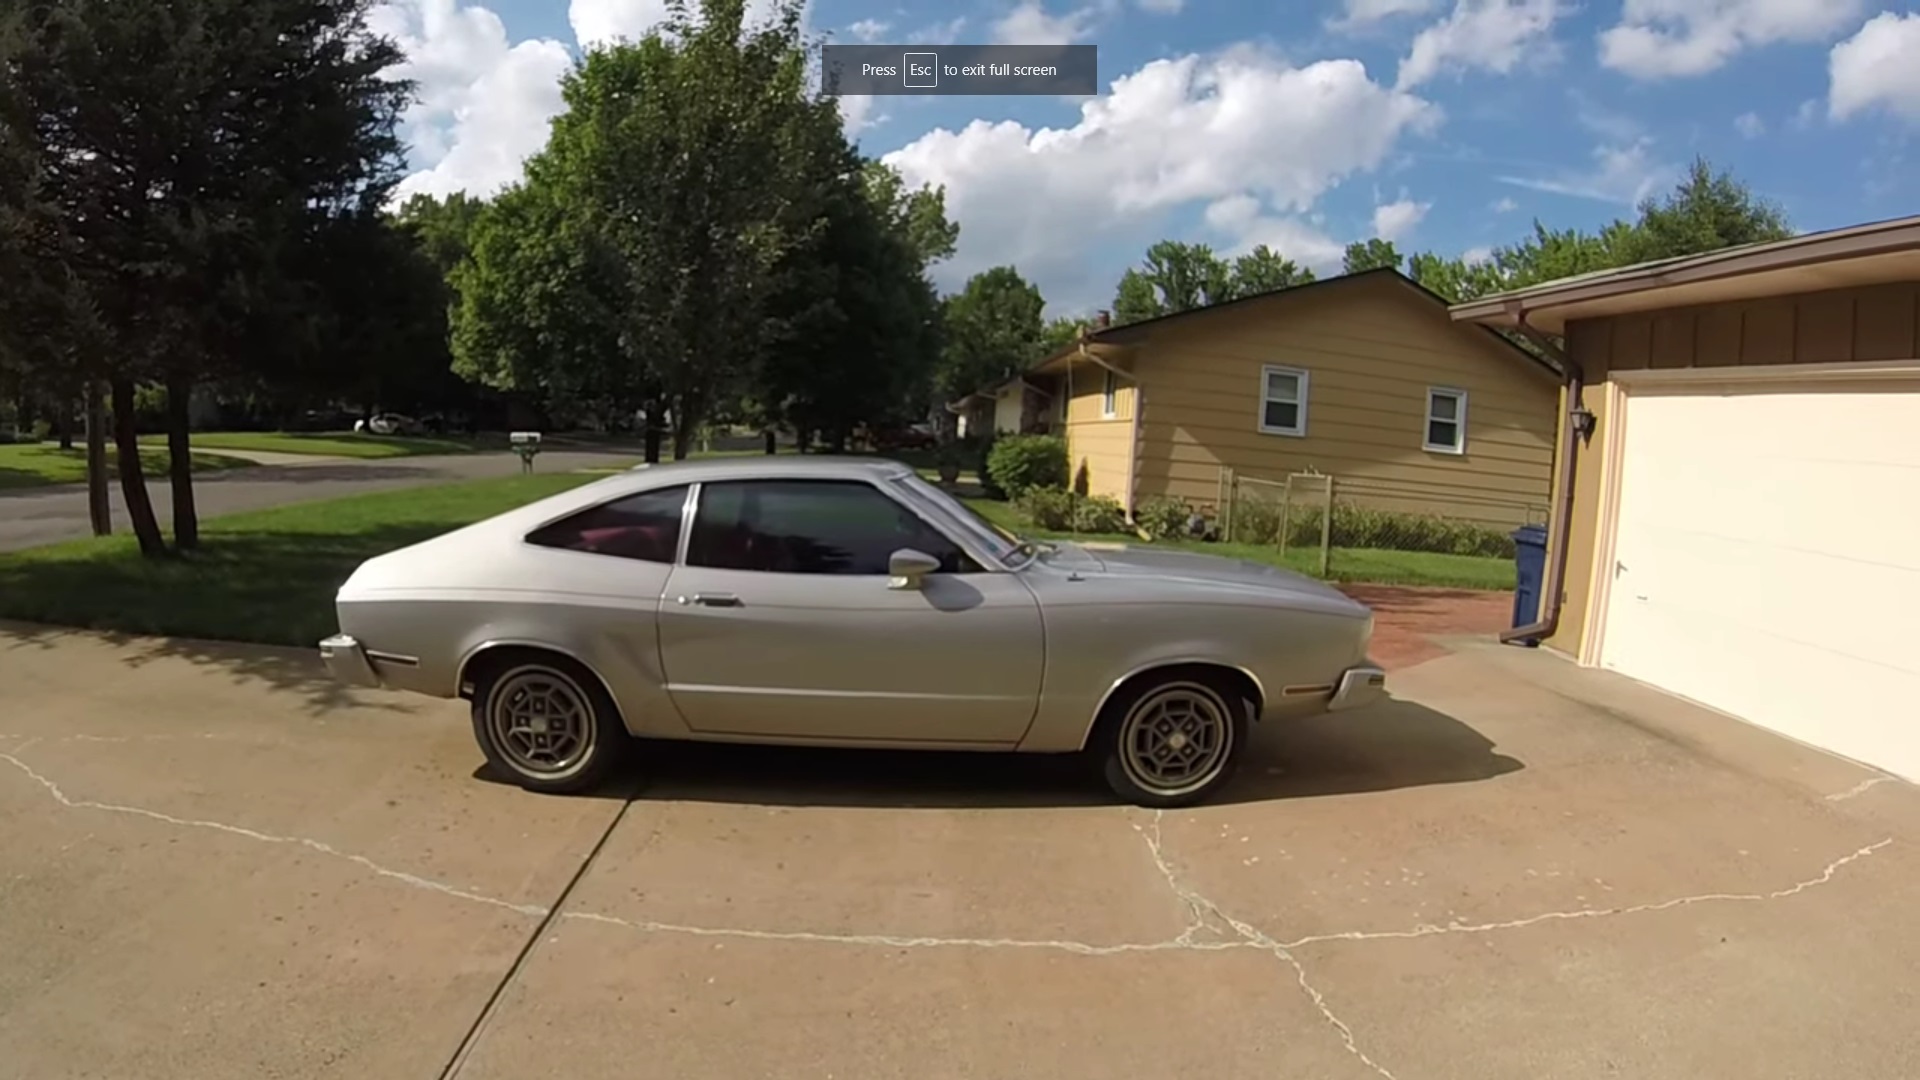 Video: 1978 Ford Mustang II Fastback Full Tour + Test Drive